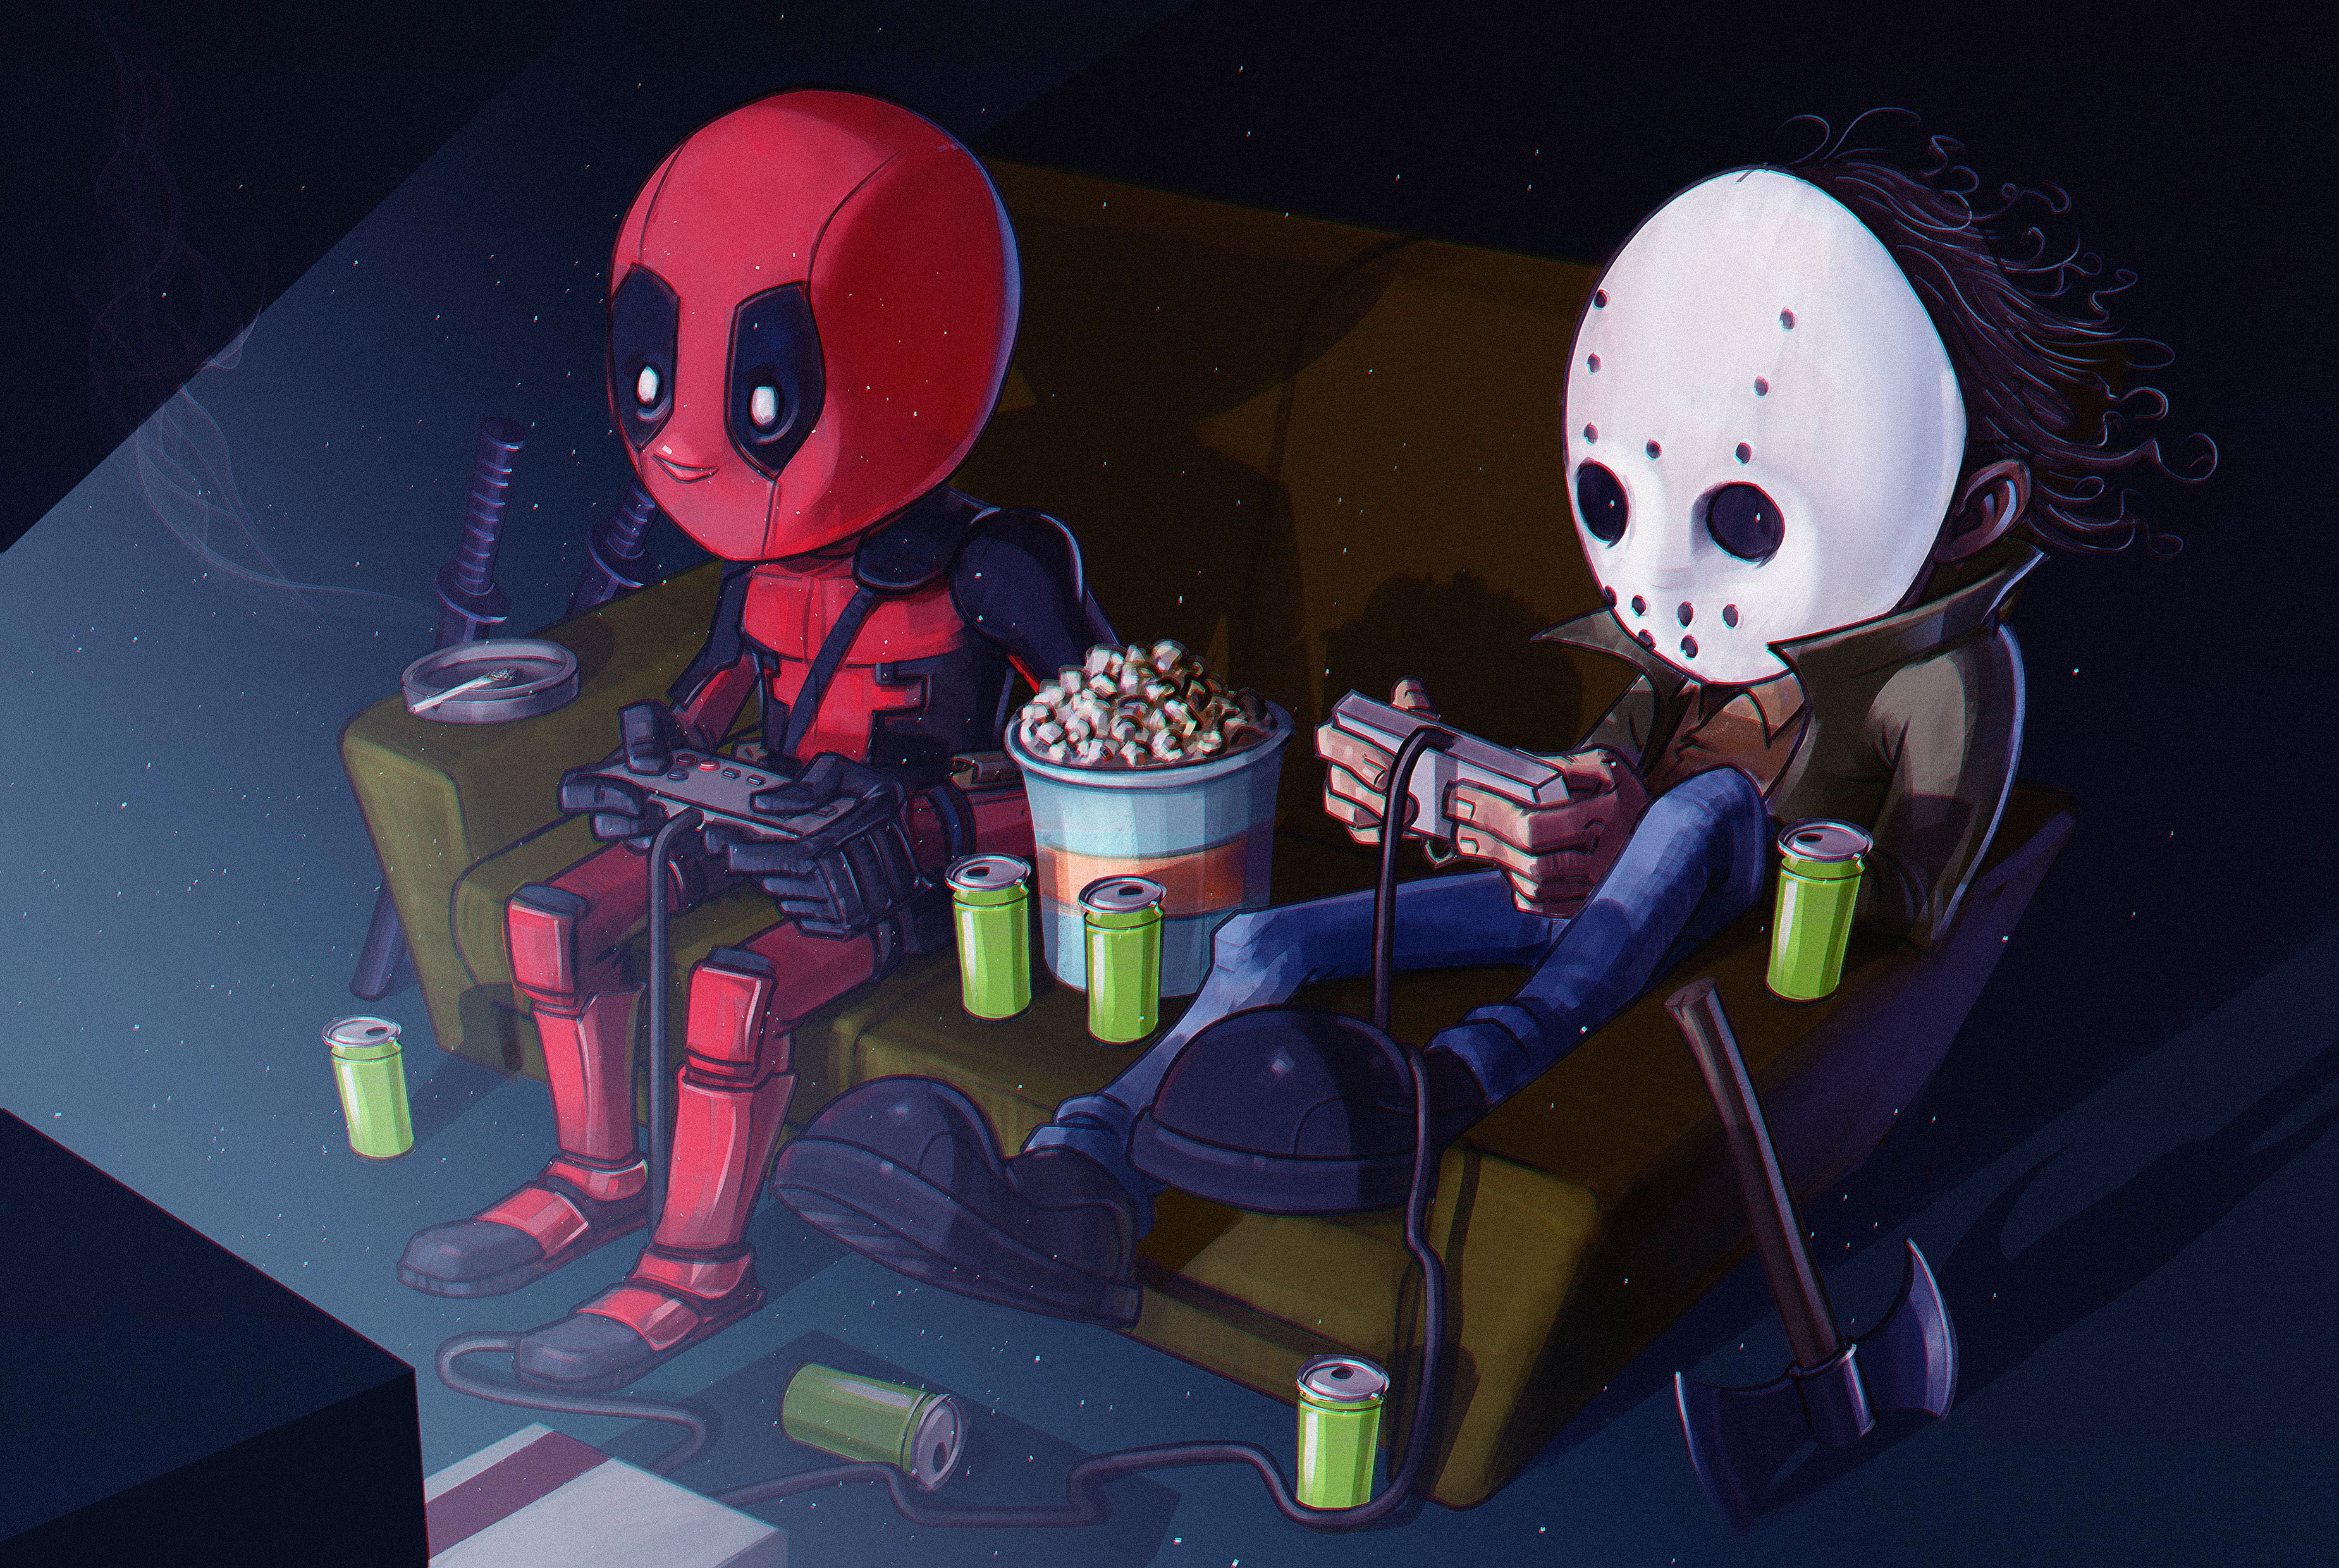 Deadpool And His Friend Playing Video Games, HD Superheroes, 4k